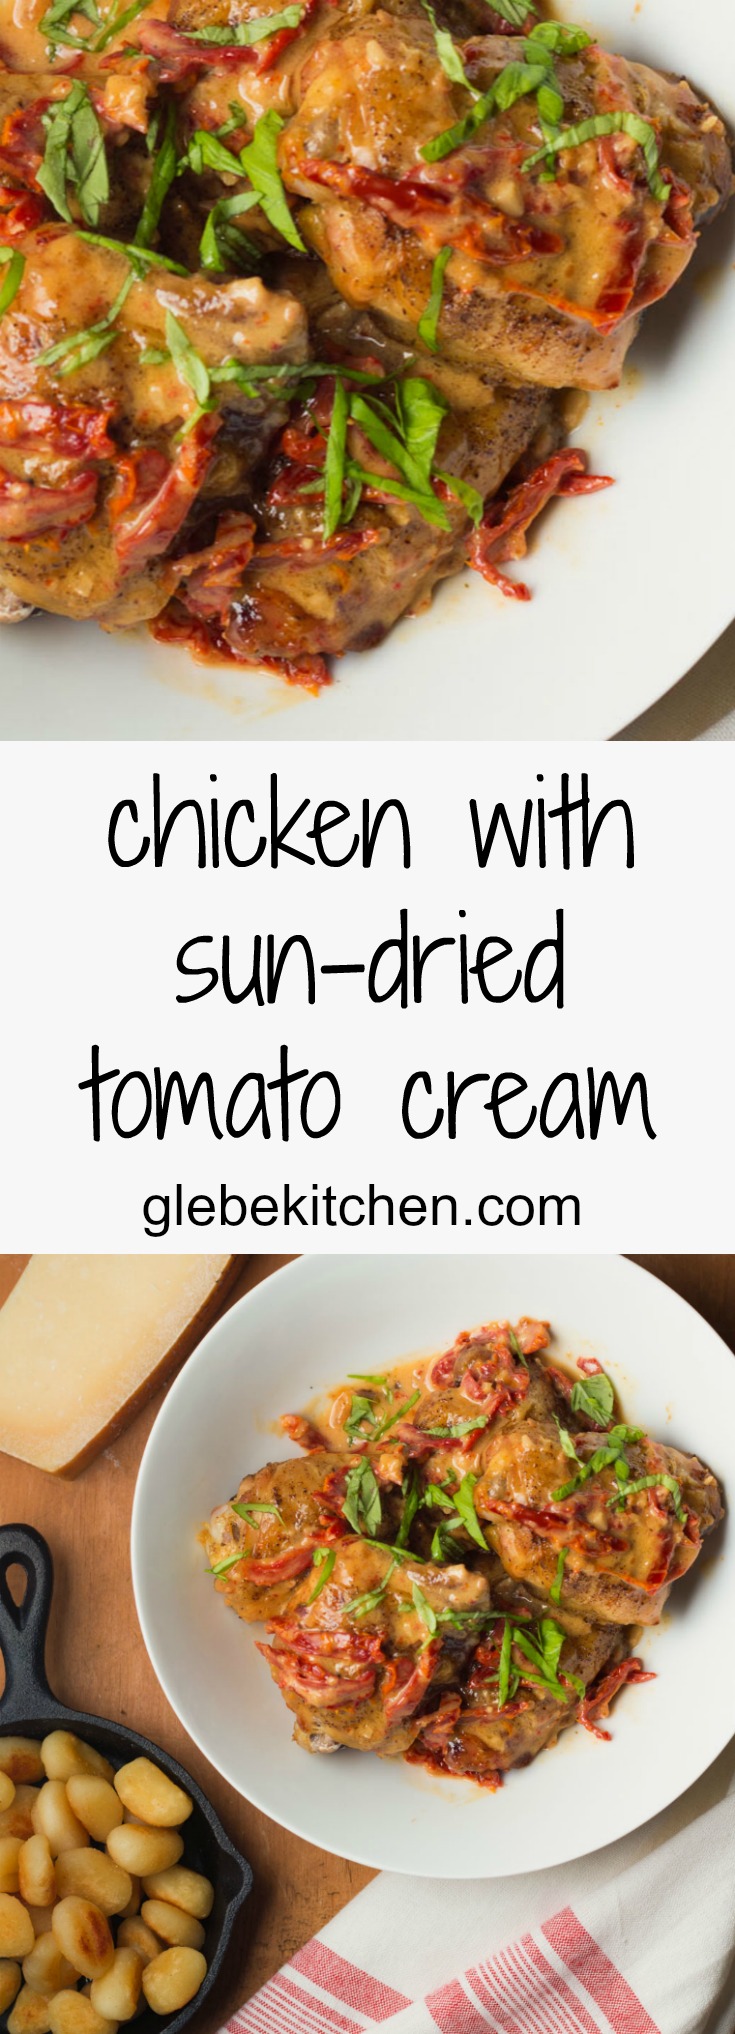 Chicken with sun-dried tomato cream sauce. It's a blast from the past!